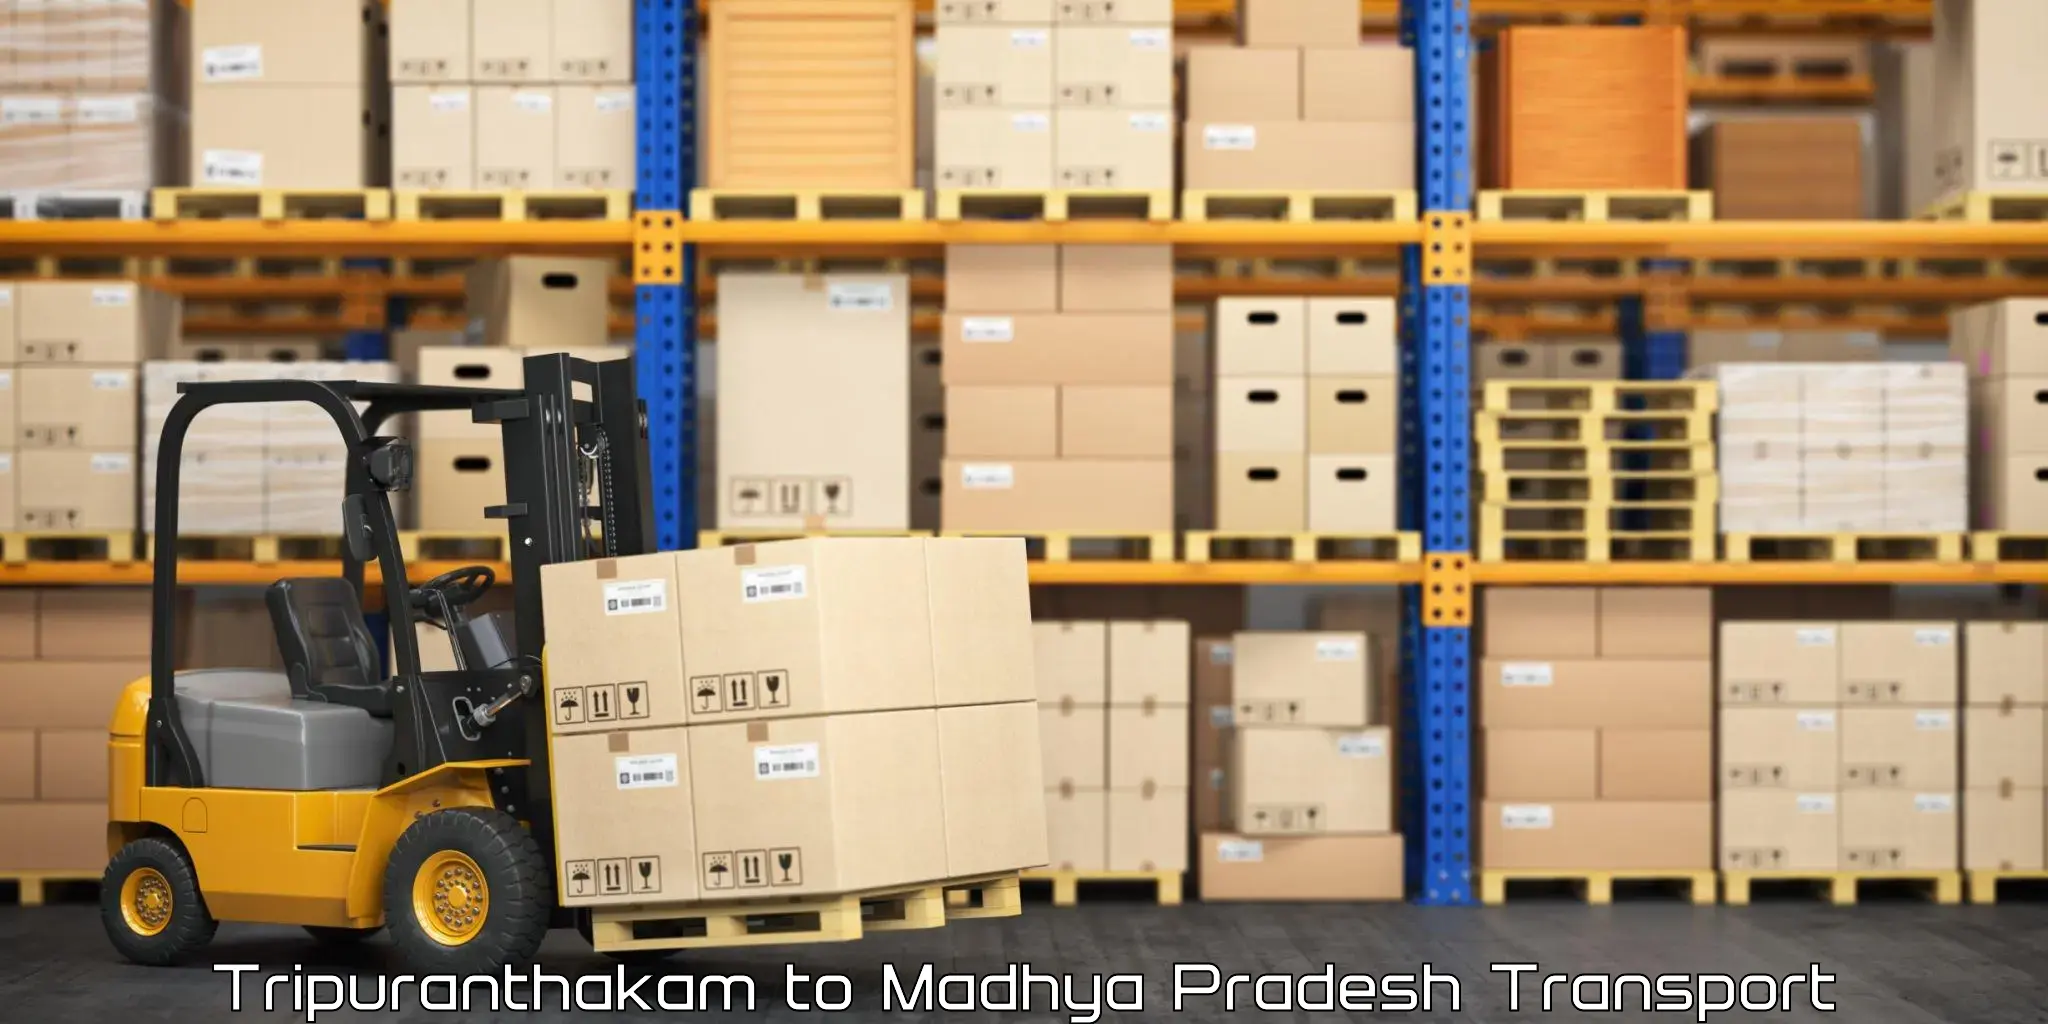 Domestic goods transportation services in Tripuranthakam to Chhindwara